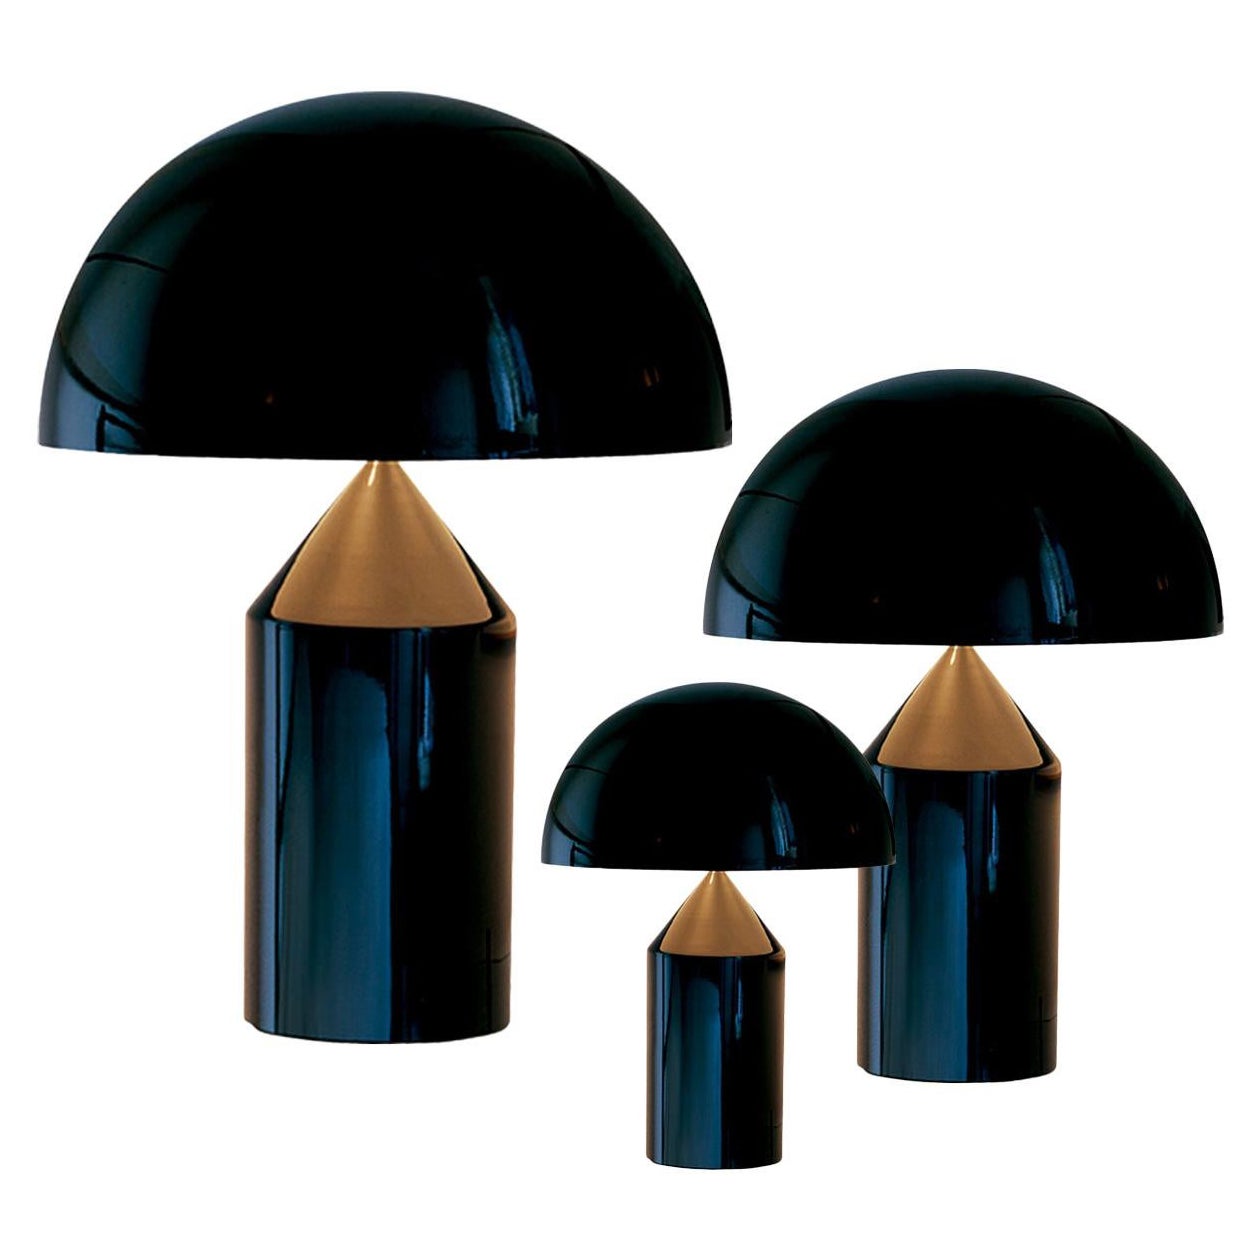 Set of 'Atollo' Large, Medium and Small Black Table Lamp Designed by Magistretti